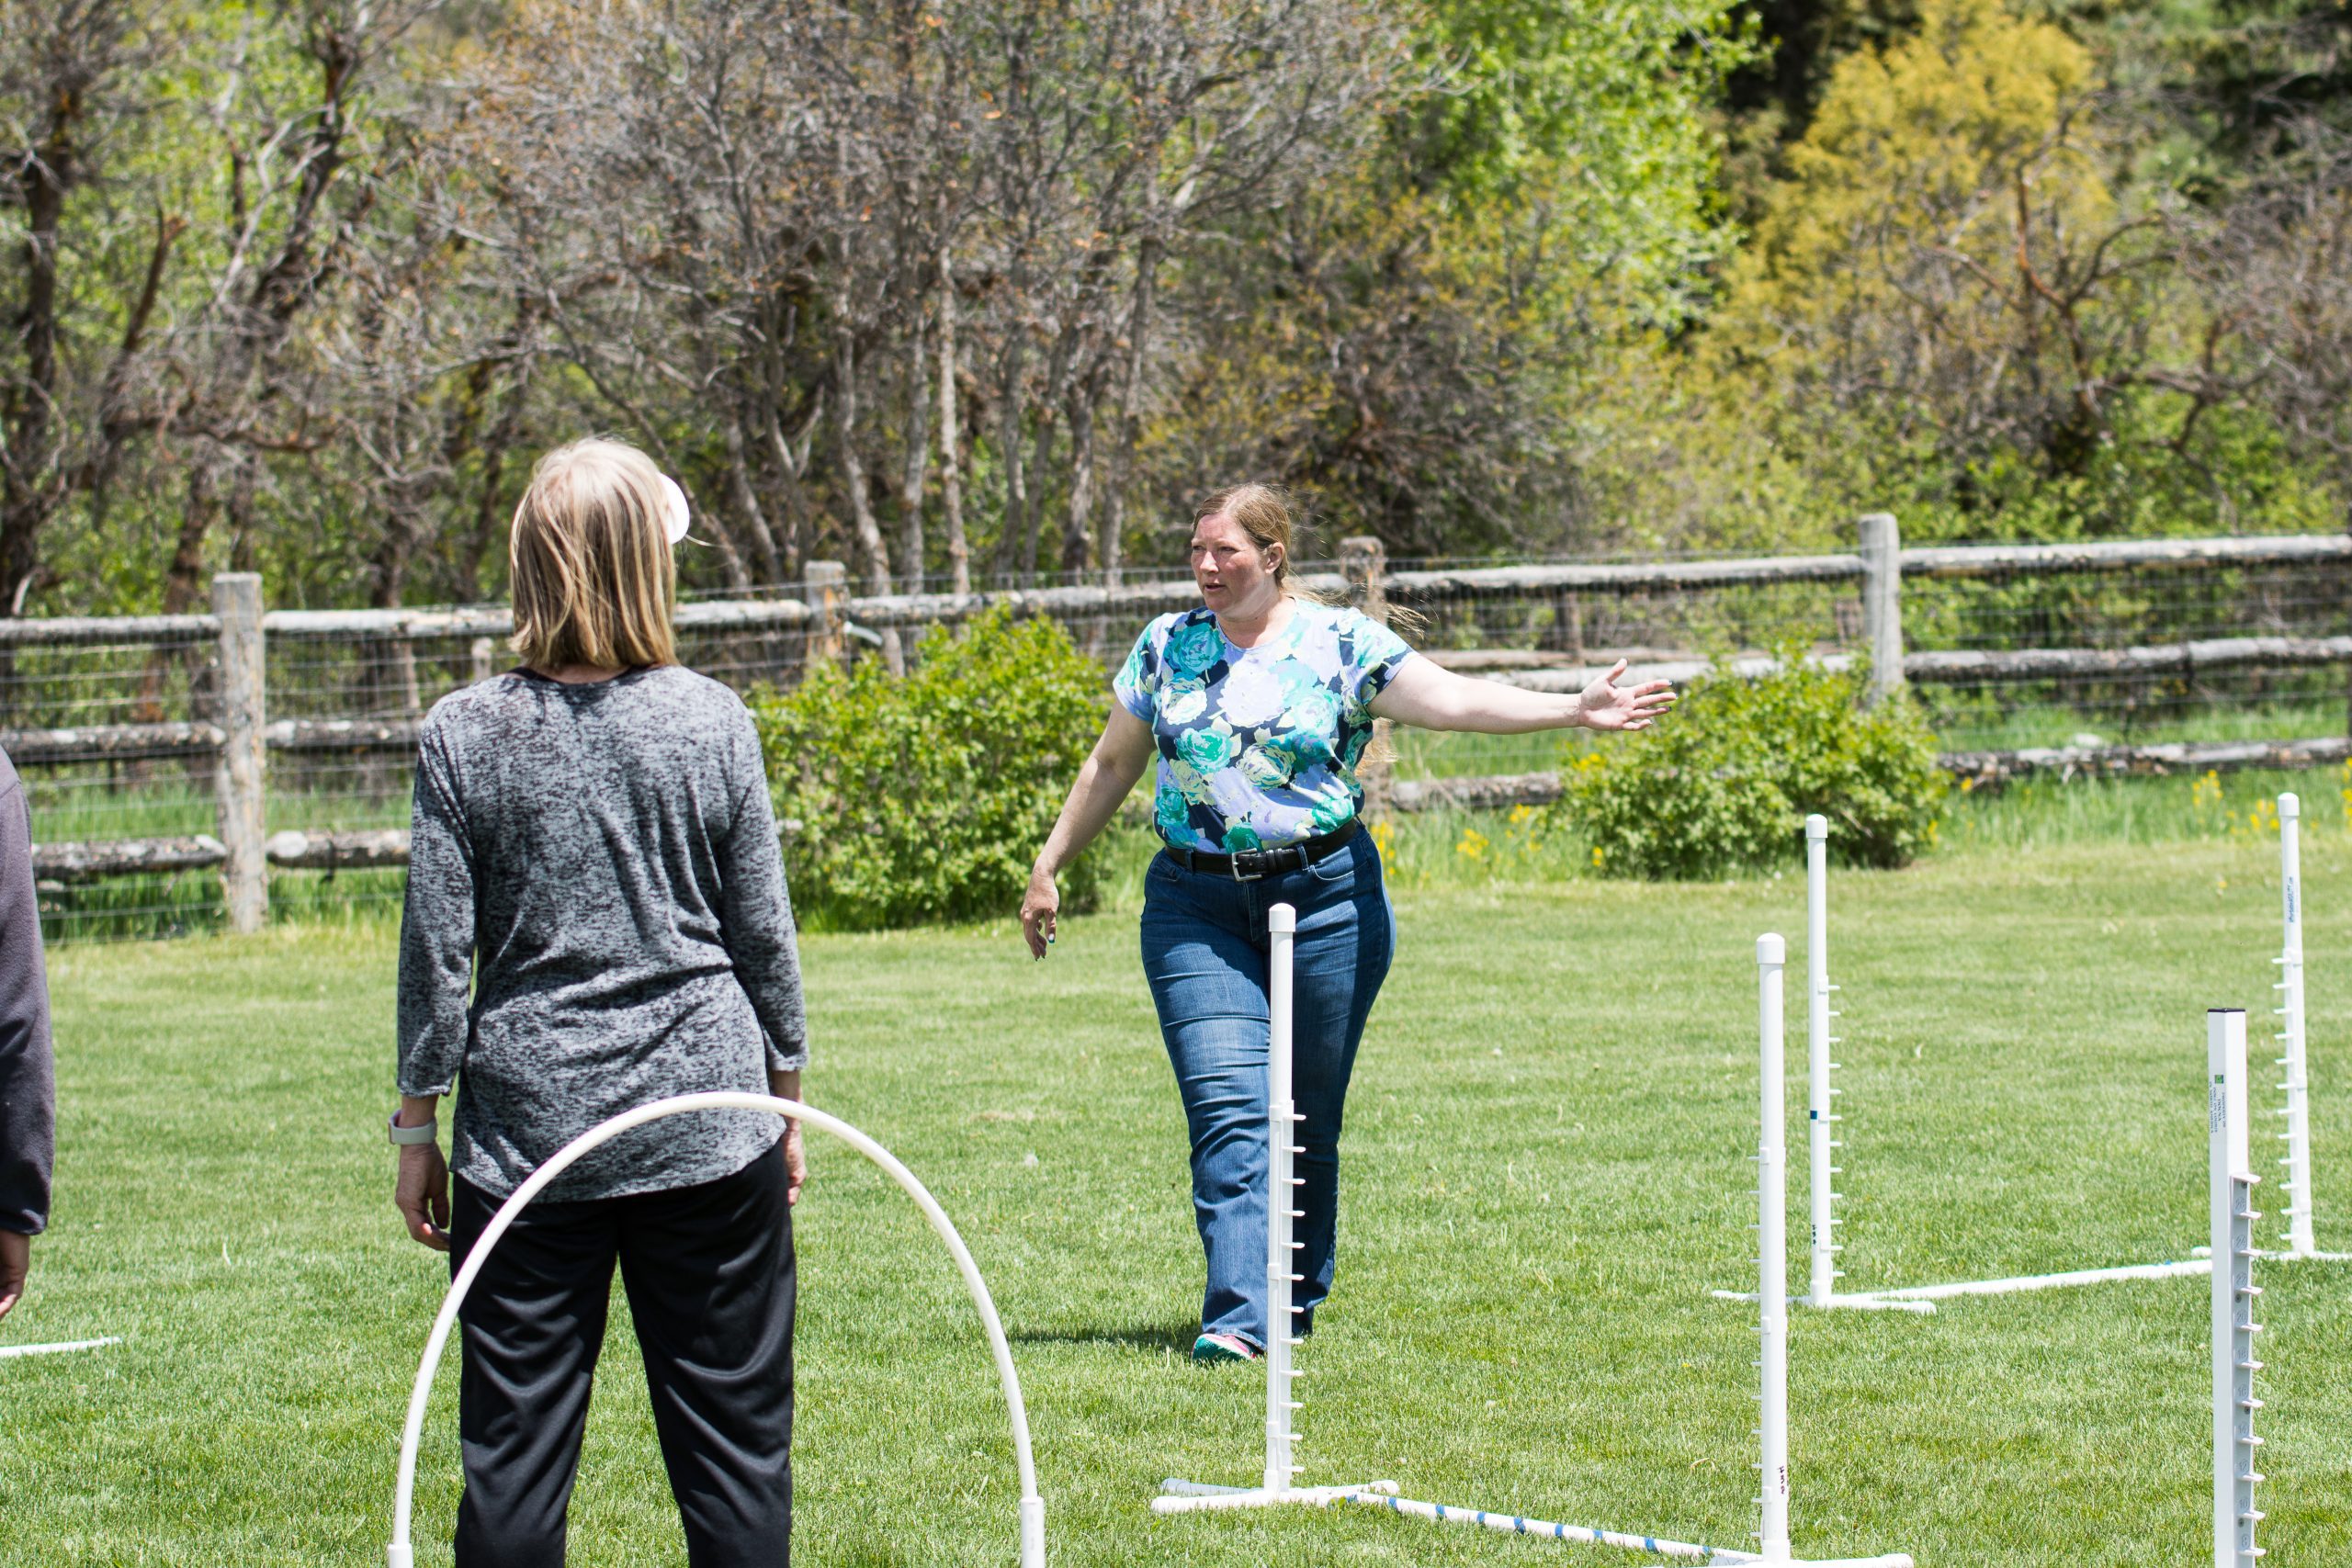 Instructor teaching agility on an outdoor field